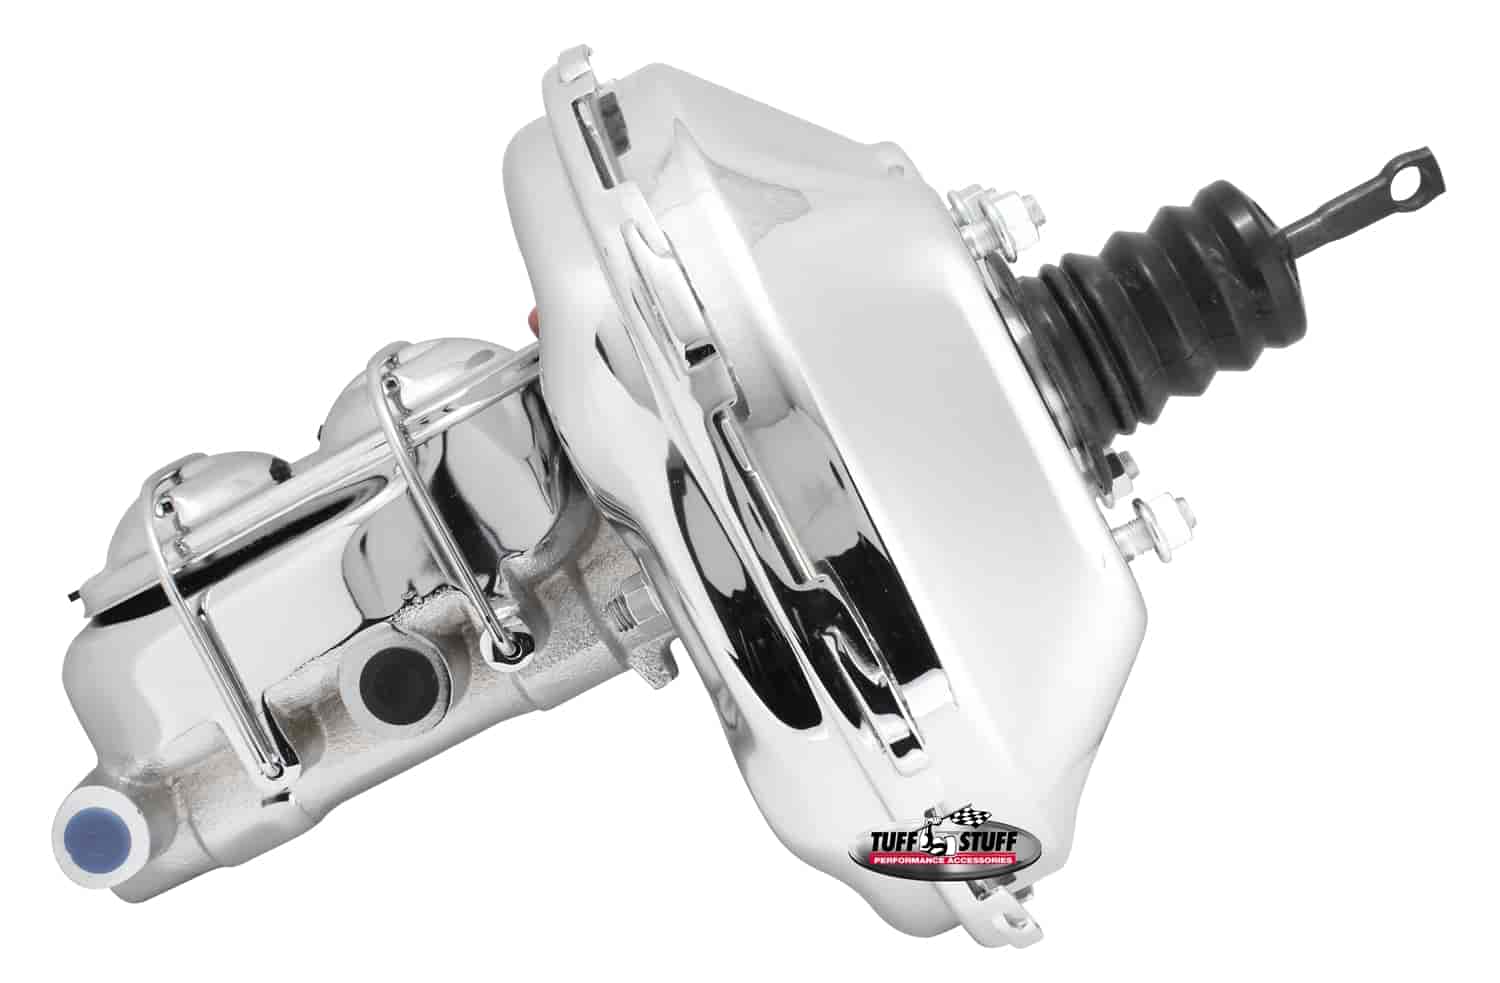 11" Booster Combo 2018 Master Cylinder